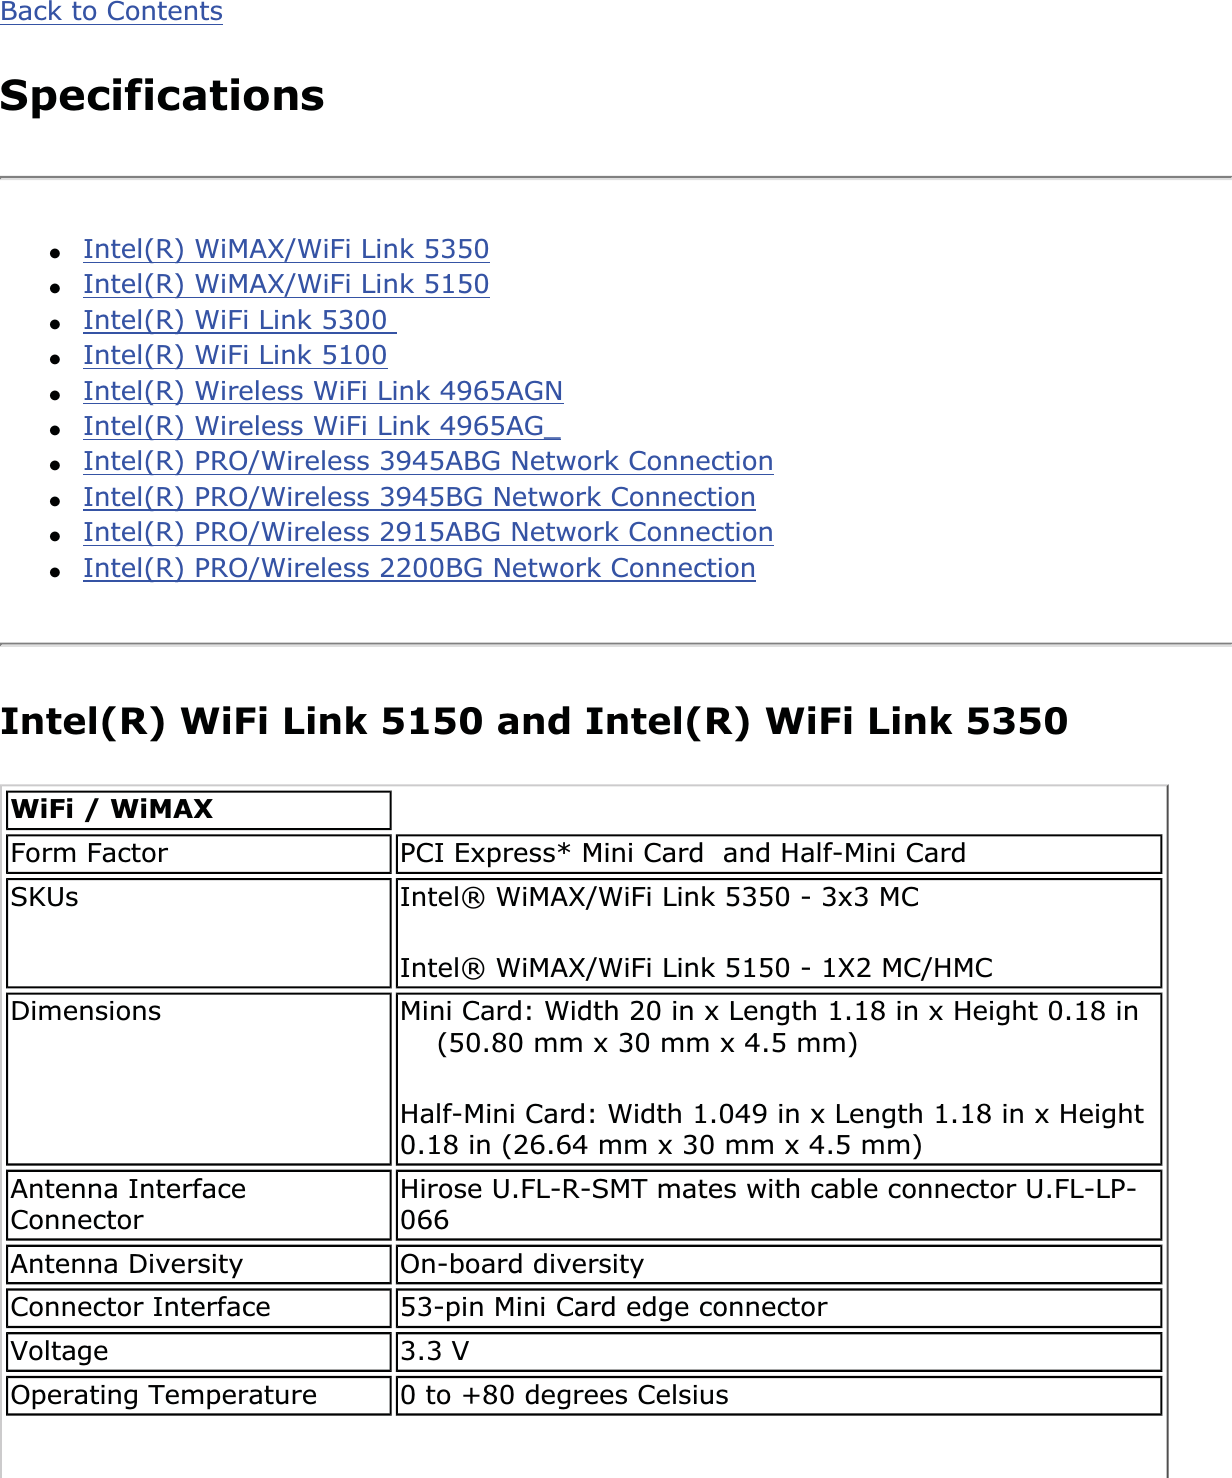 Back to ContentsSpecifications●Intel(R) WiMAX/WiFi Link 5350●Intel(R) WiMAX/WiFi Link 5150●Intel(R) WiFi Link 5300 ●Intel(R) WiFi Link 5100●Intel(R) Wireless WiFi Link 4965AGN●Intel(R) Wireless WiFi Link 4965AG_●Intel(R) PRO/Wireless 3945ABG Network Connection●Intel(R) PRO/Wireless 3945BG Network Connection●Intel(R) PRO/Wireless 2915ABG Network Connection●Intel(R) PRO/Wireless 2200BG Network ConnectionIntel(R) WiFi Link 5150 and Intel(R) WiFi Link 5350WiFi / WiMAXForm Factor PCI Express* Mini Card  and Half-Mini Card SKUs Intel® WiMAX/WiFi Link 5350 - 3x3 MCIntel® WiMAX/WiFi Link 5150 - 1X2 MC/HMCDimensions Mini Card: Width 20 in x Length 1.18 in x Height 0.18 in     (50.80 mm x 30 mm x 4.5 mm)Half-Mini Card: Width 1.049 in x Length 1.18 in x Height 0.18 in (26.64 mm x 30 mm x 4.5 mm)Antenna Interface Connector Hirose U.FL-R-SMT mates with cable connector U.FL-LP-066Antenna Diversity On-board diversityConnector Interface 53-pin Mini Card edge connectorVoltage 3.3 VOperating Temperature 0 to +80 degrees Celsius